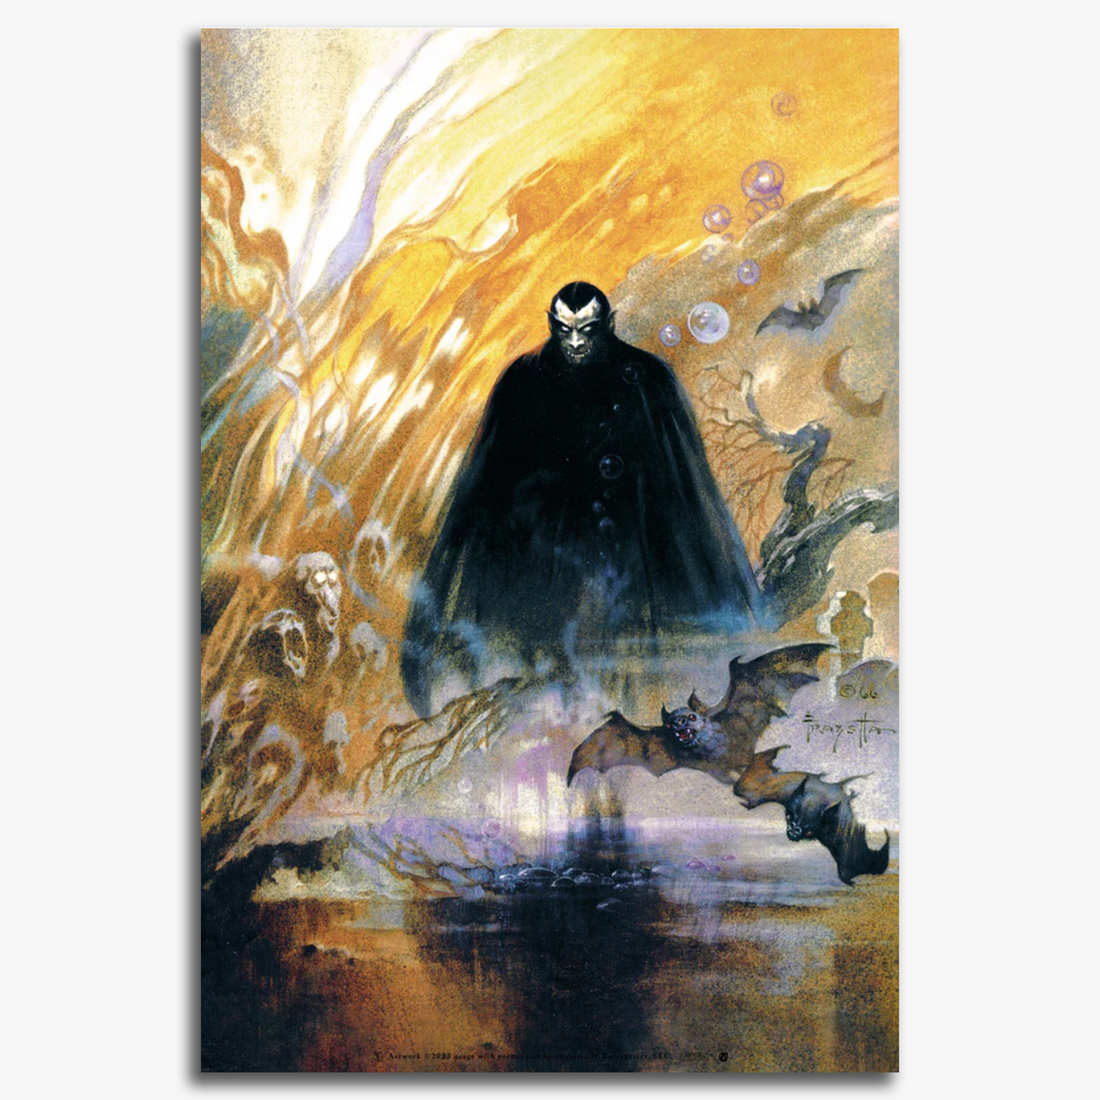 Count Dracula Limited Edition Screen Print